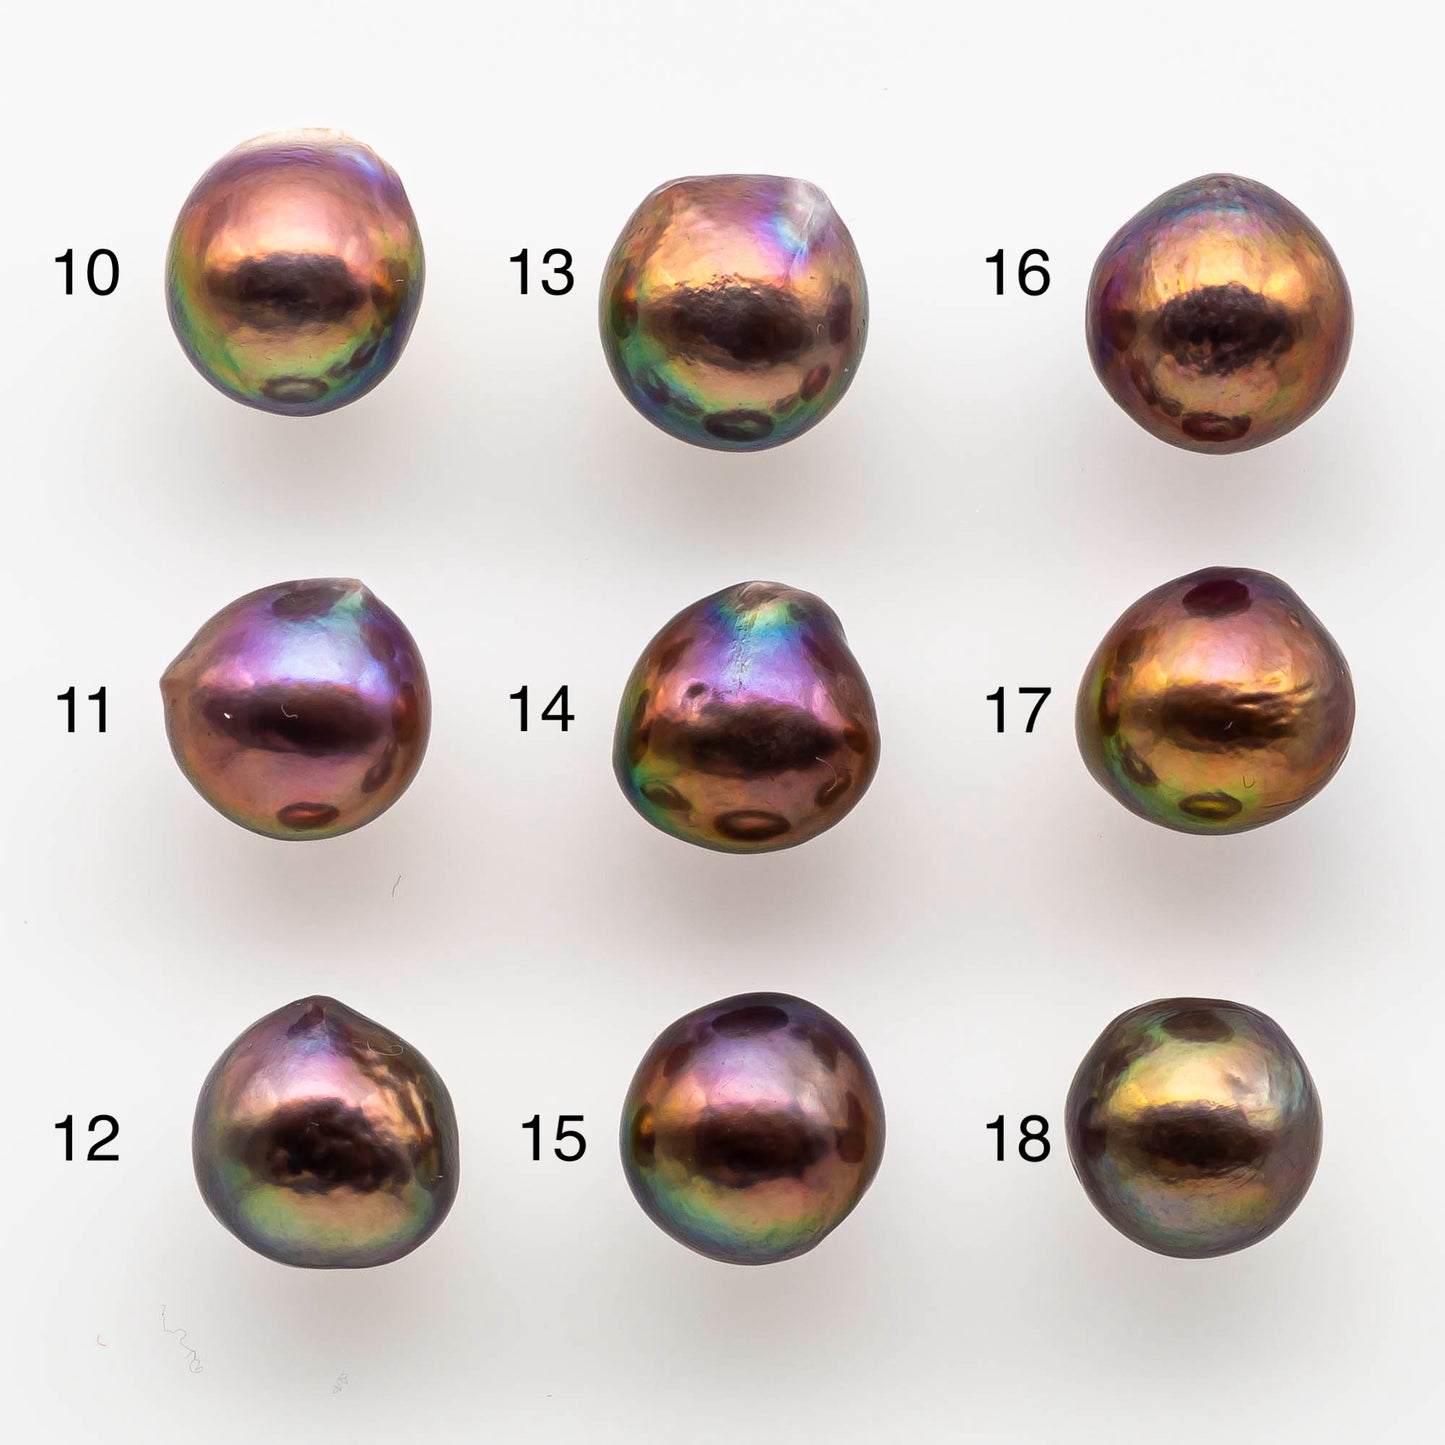 11-12mm Edison Pearl Drop in Natural Metallic Purple with Brown and Green Tones, Amazing Luster in Undrilled or Large Hole, SKU # 1798EP